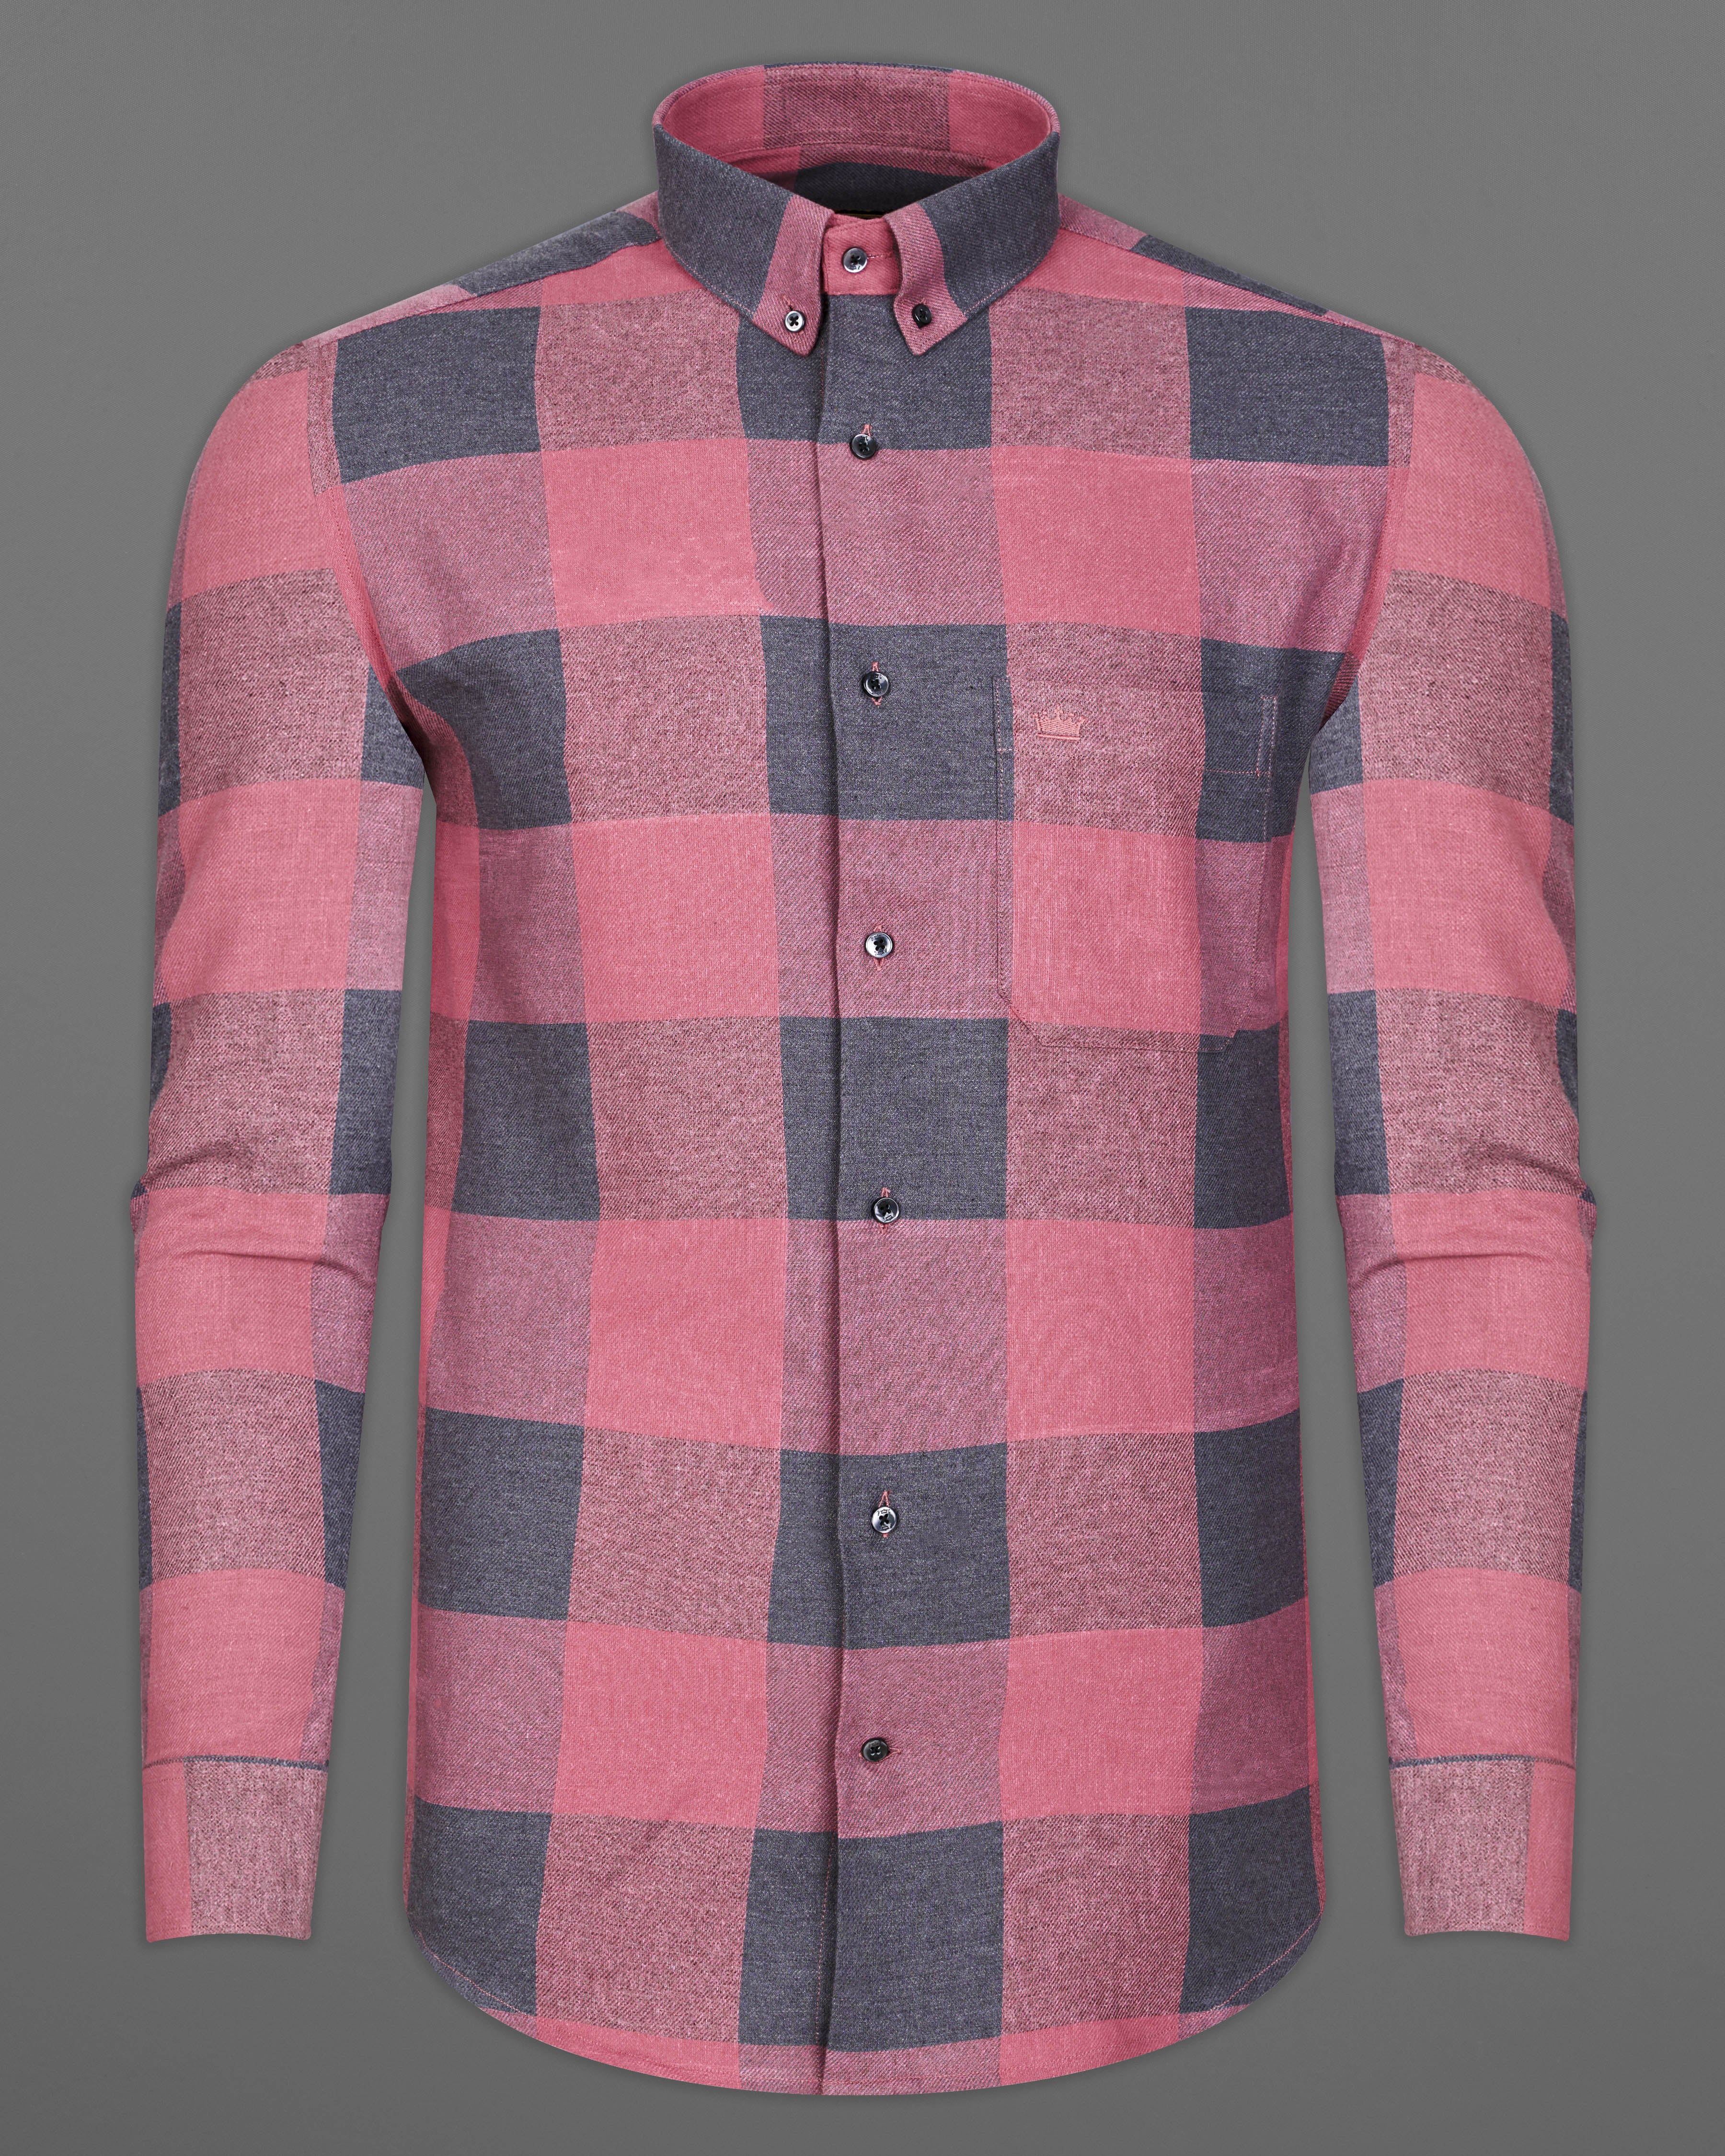 Turkish Pink with Gravel Gray Twill Checked Premium Cotton Overshirt 9463-BD-BLK-OS-38, 9463-BD-BLK-OS-H-38, 9463-BD-BLK-OS-39, 9463-BD-BLK-OS-H-39, 9463-BD-BLK-OS-40, 9463-BD-BLK-OS-H-40, 9463-BD-BLK-OS-42, 9463-BD-BLK-OS-H-42, 9463-BD-BLK-OS-44, 9463-BD-BLK-OS-H-44, 9463-BD-BLK-OS-46, 9463-BD-BLK-OS-H-46, 9463-BD-BLK-OS-48, 9463-BD-BLK-OS-H-48, 9463-BD-BLK-OS-50, 9463-BD-BLK-OS-H-50, 9463-BD-BLK-OS-52, 9463-BD-BLK-OS-H-52